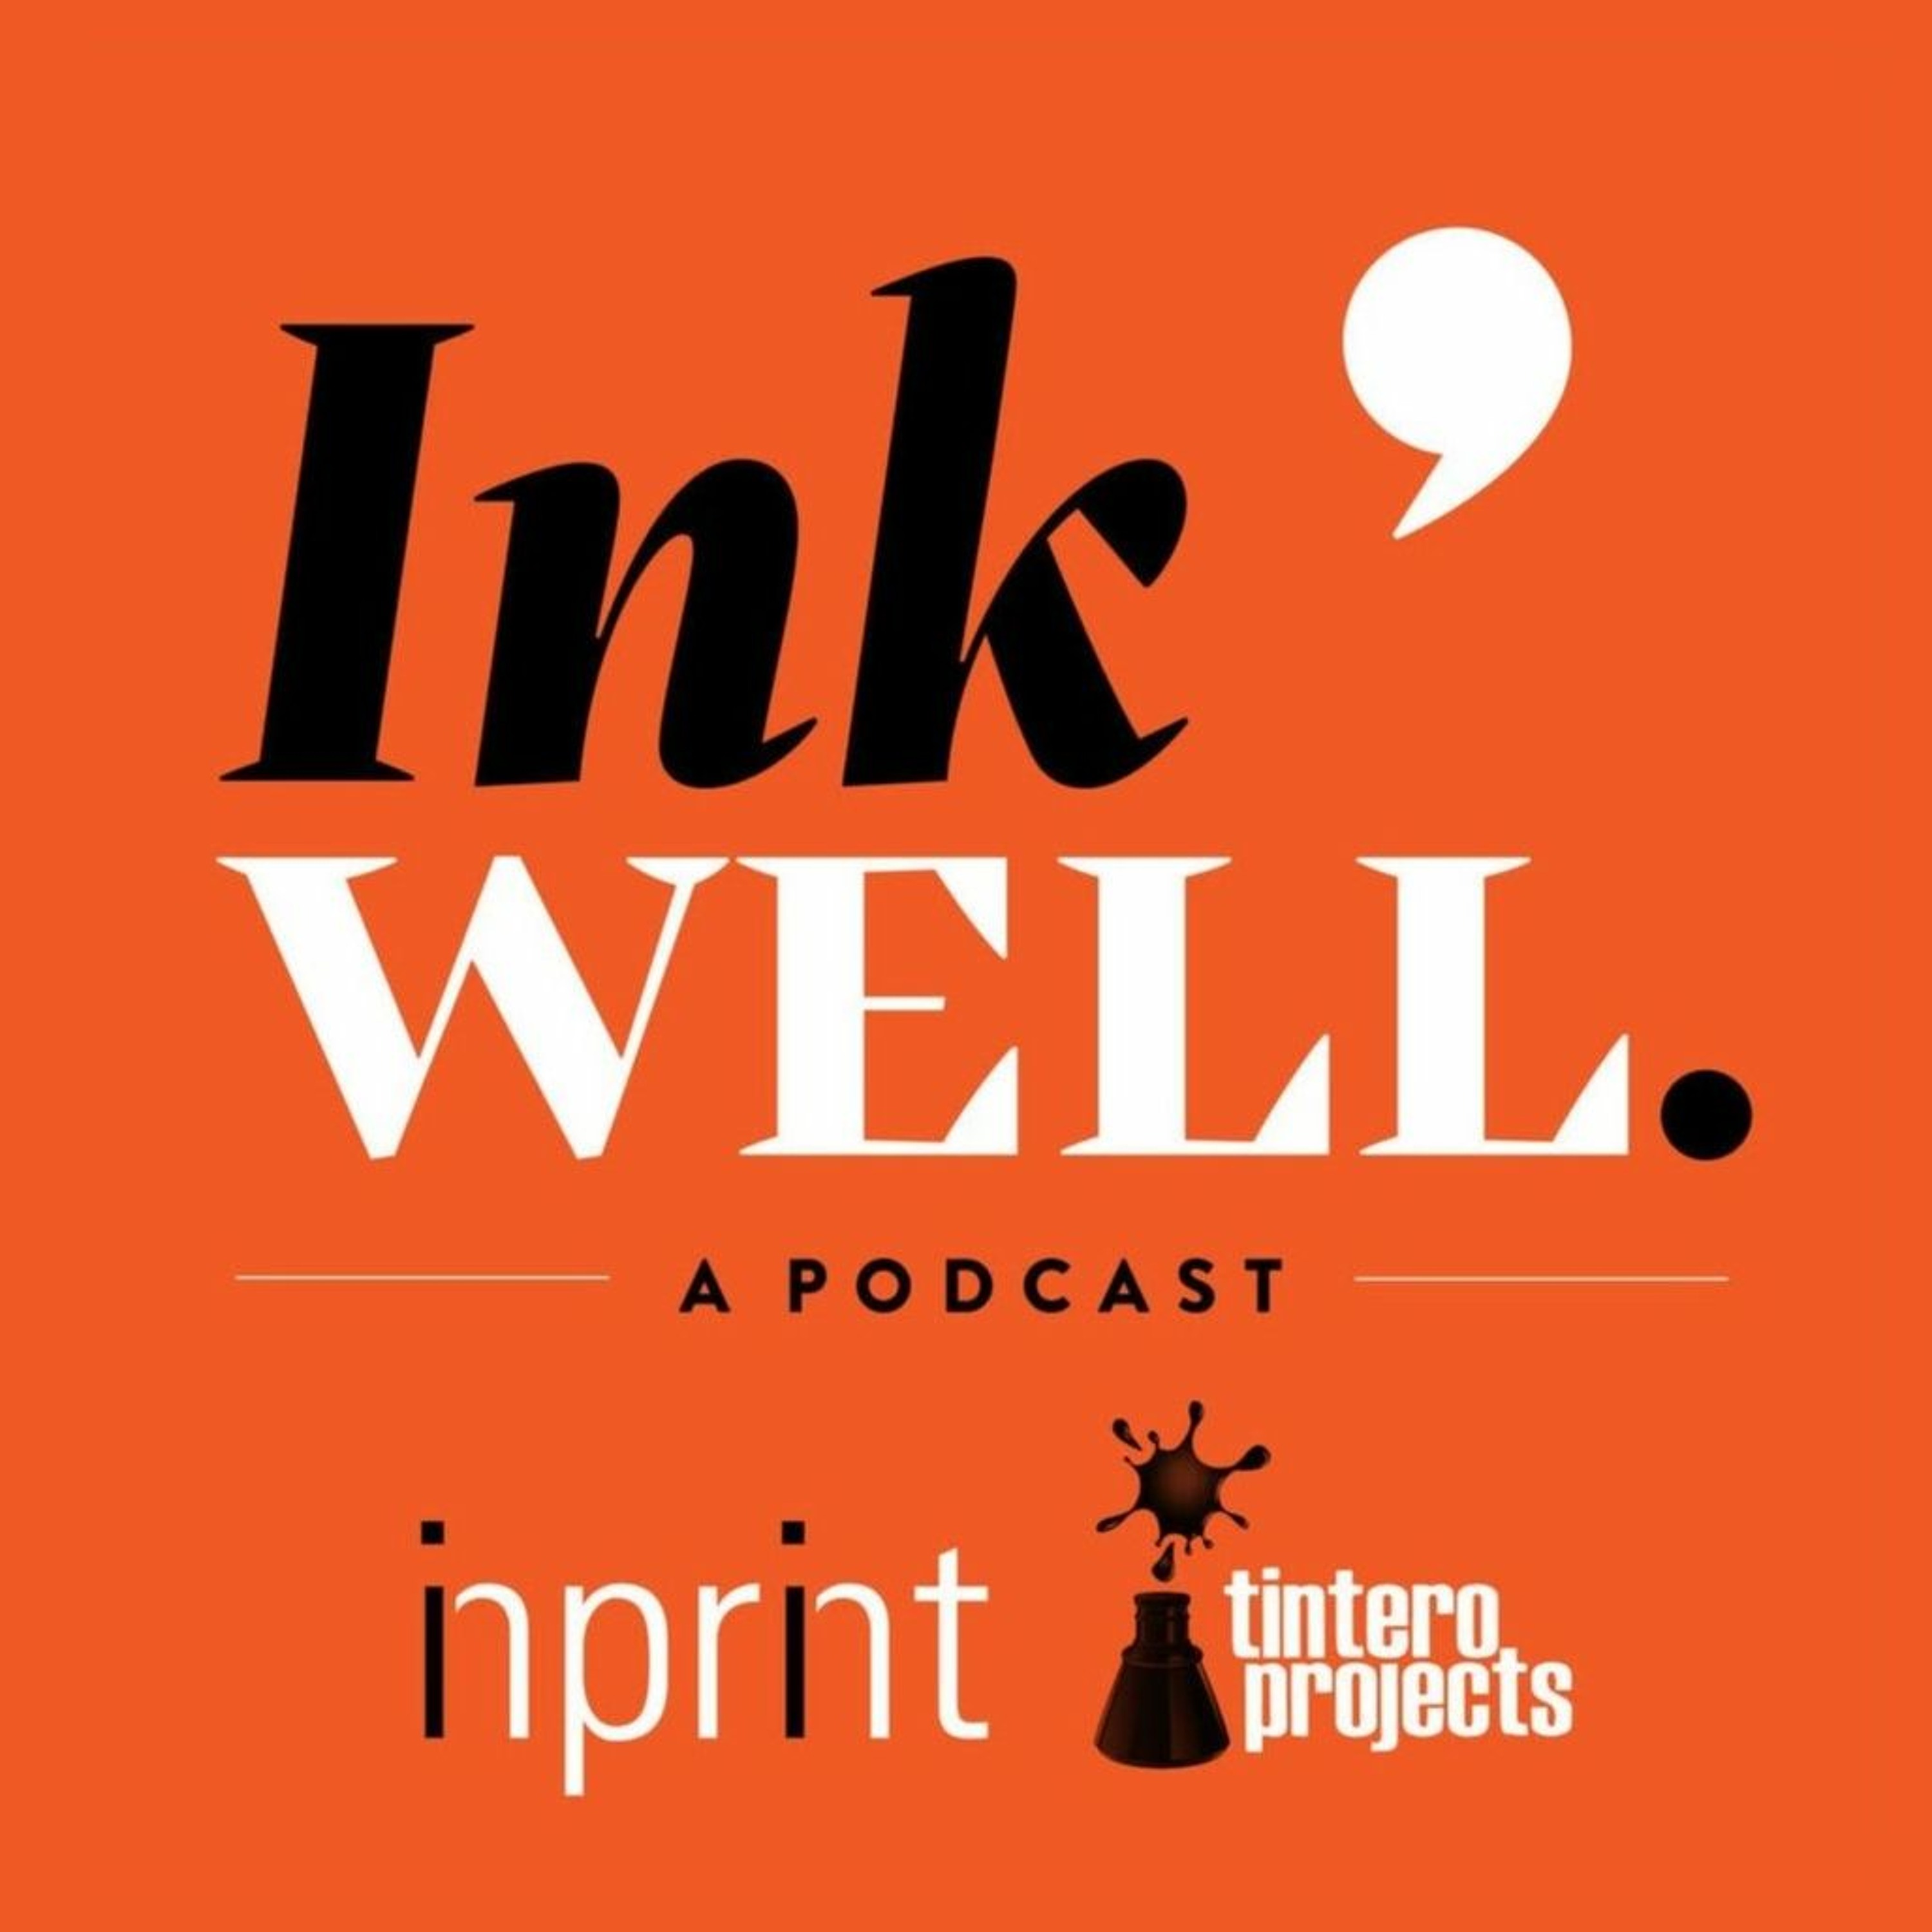 Ink Well S1 E6 featuring Jasminne Mendez